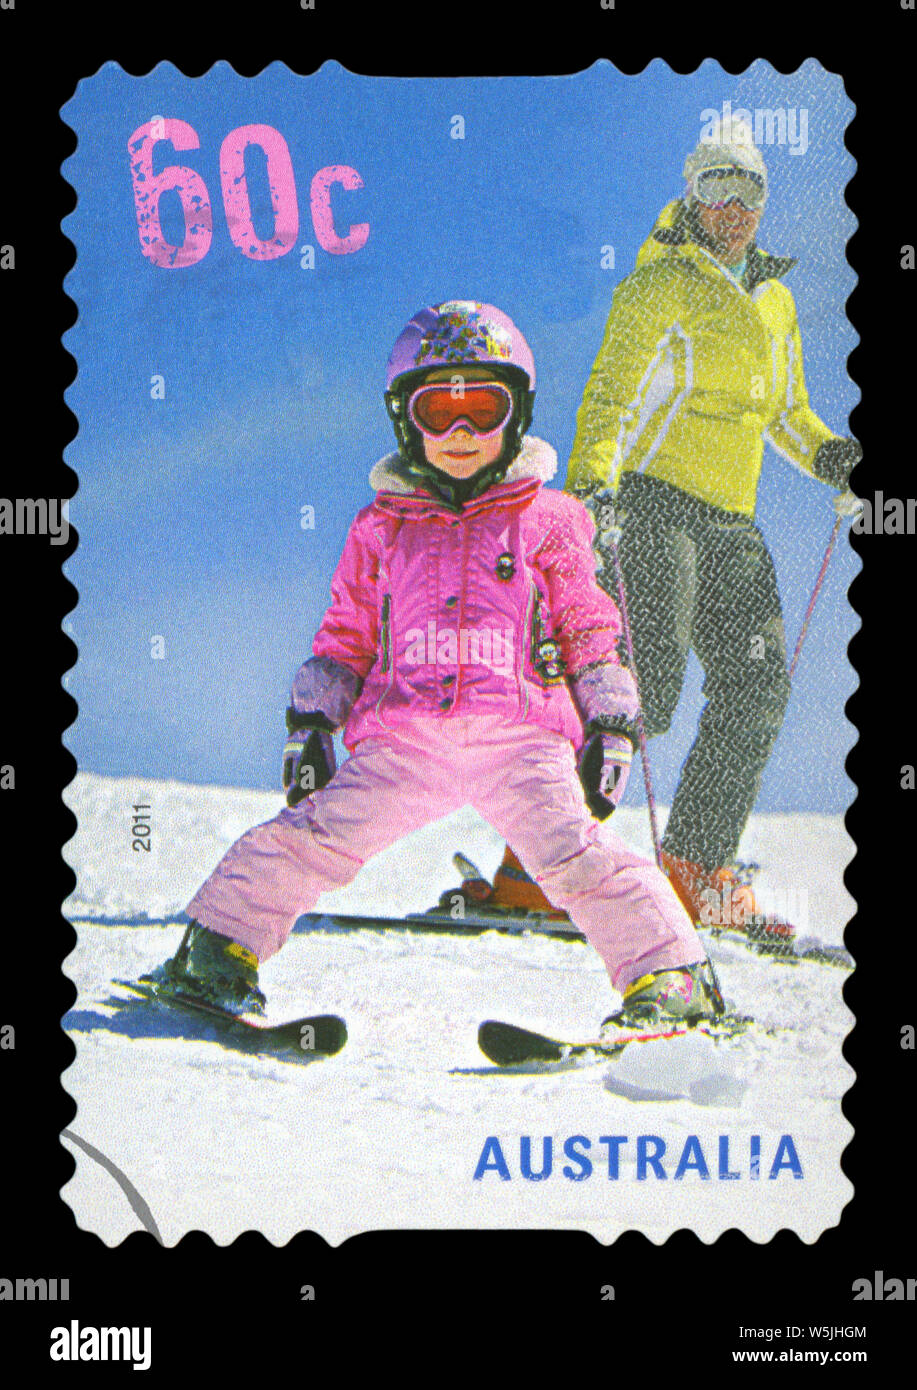 AUSTRALIA - CIRCA 2011: A used postage stamp from Australia, depicting an image of a child skiing with a parent, circa 2011. Stock Photo